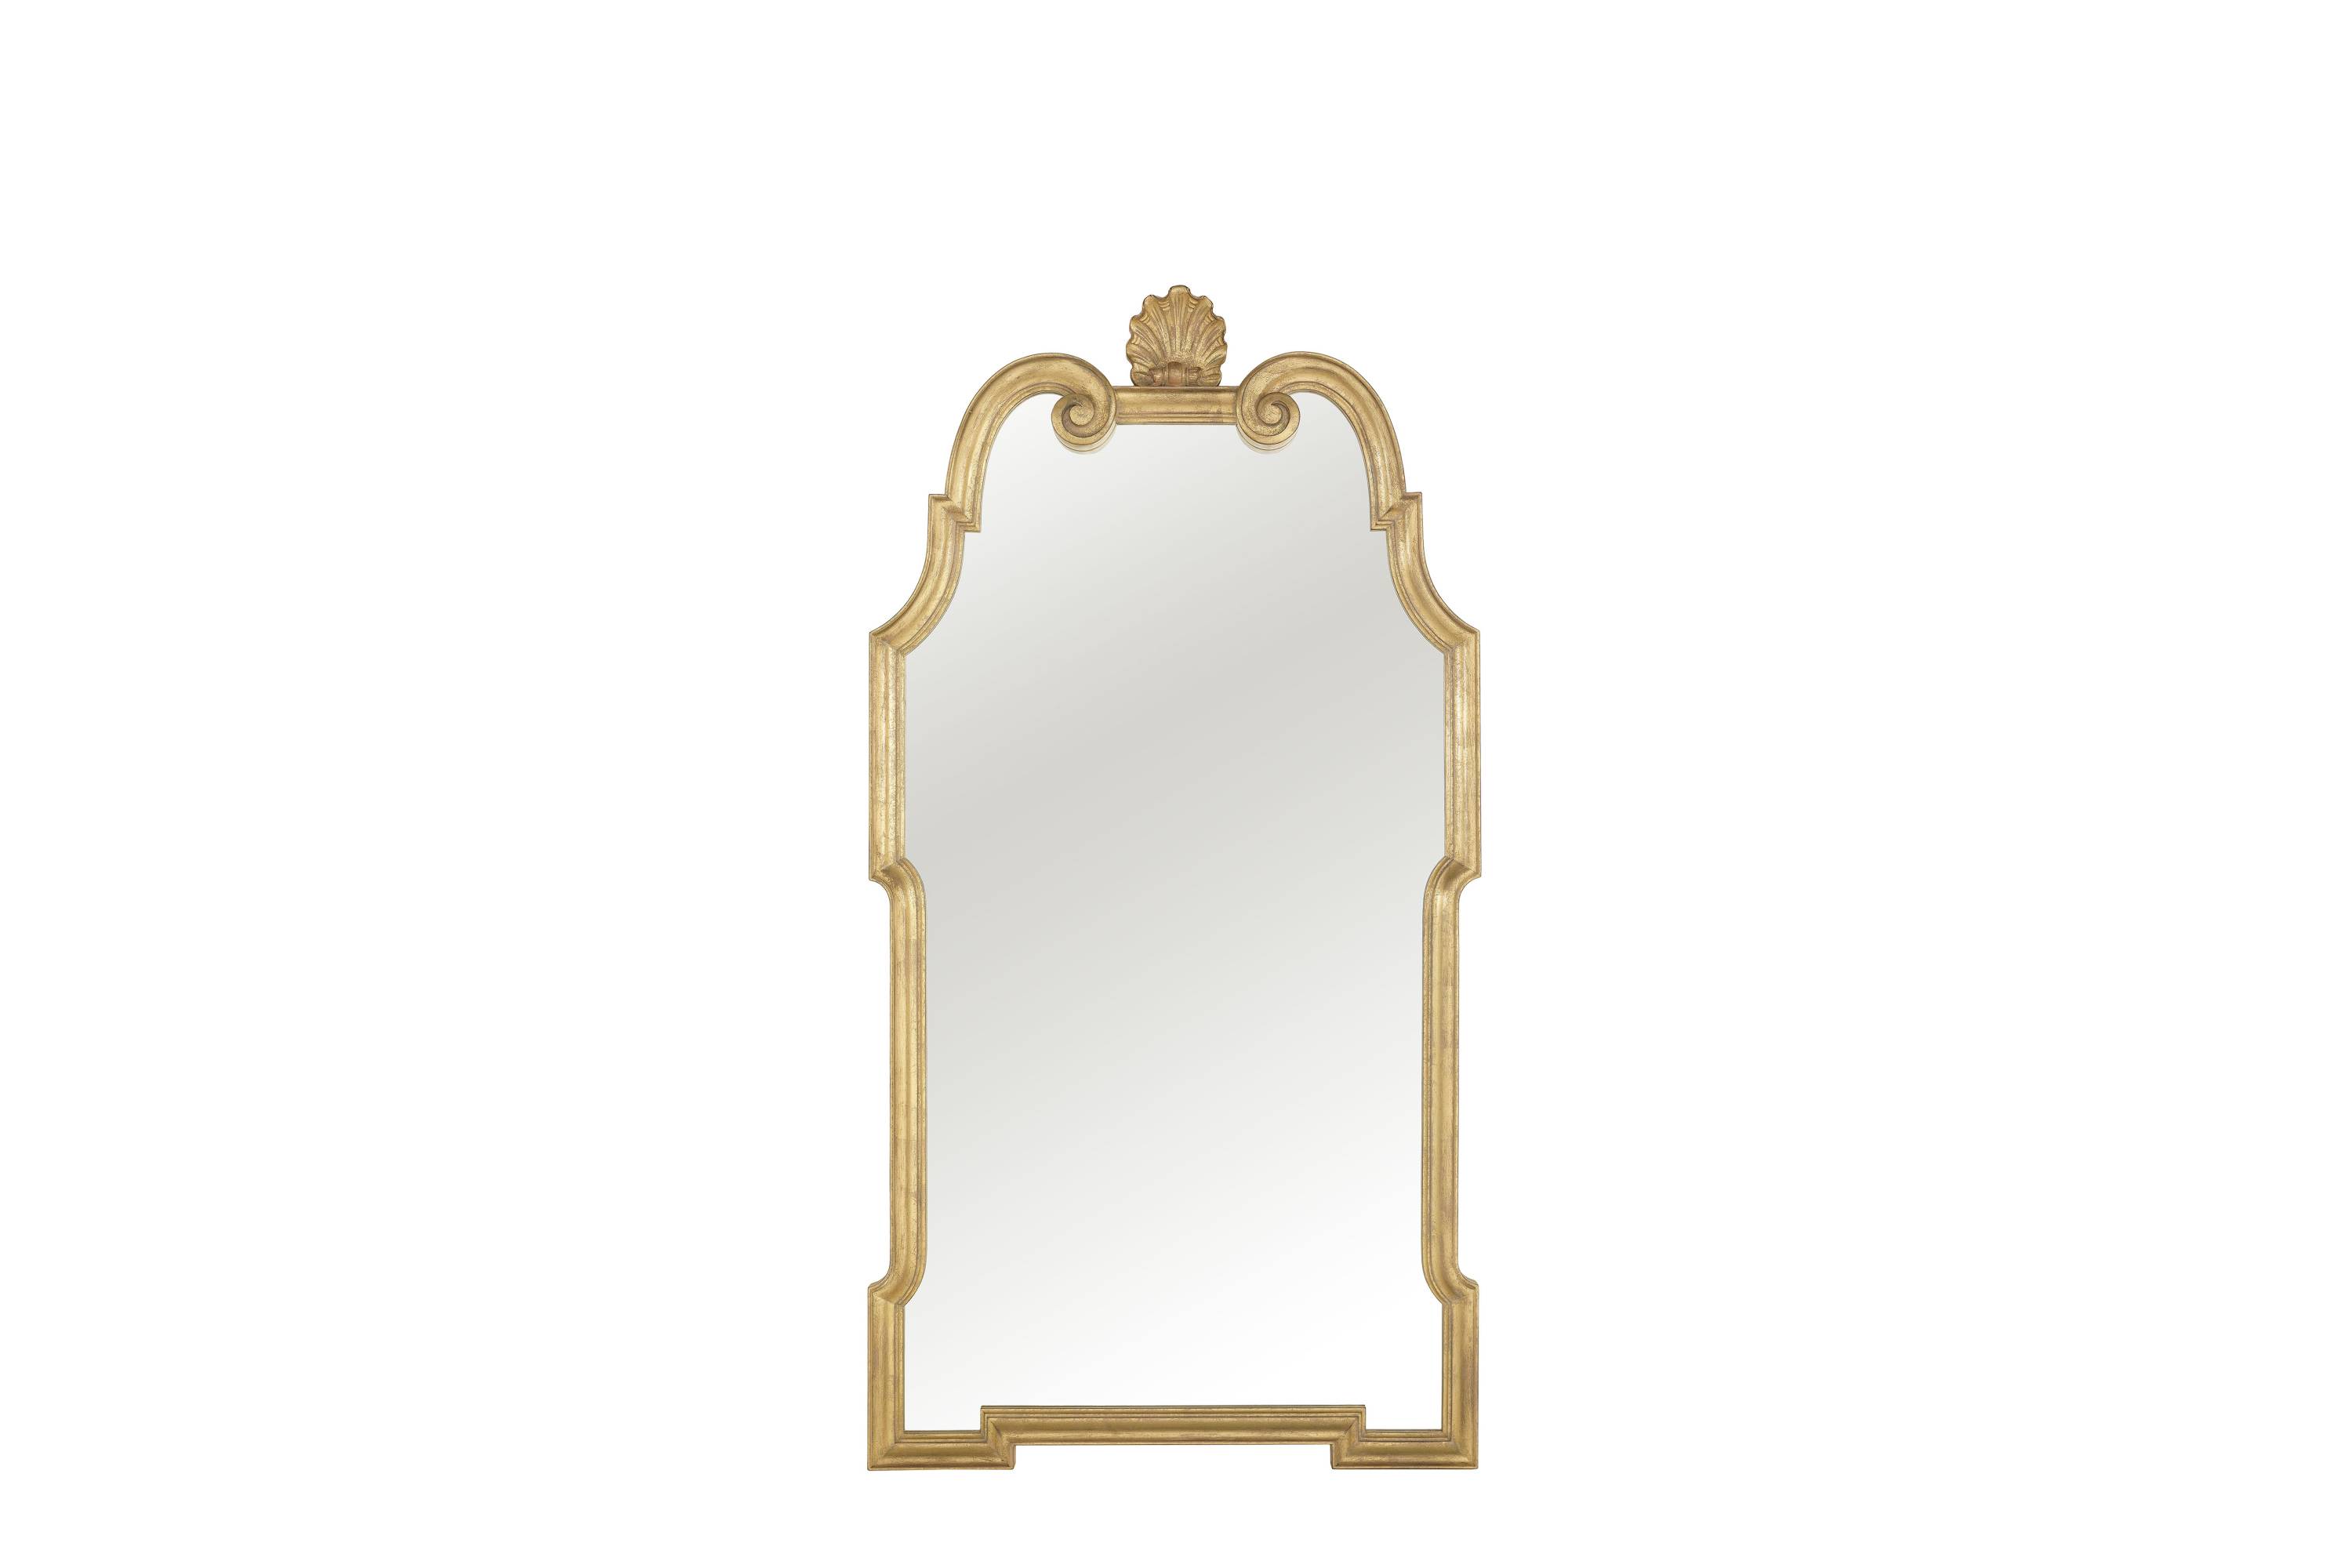 WALLACE mirror – Jumbo Collection Italian luxury classic MIRRORS. tailor-made interior design projects to meet all your furnishing needs